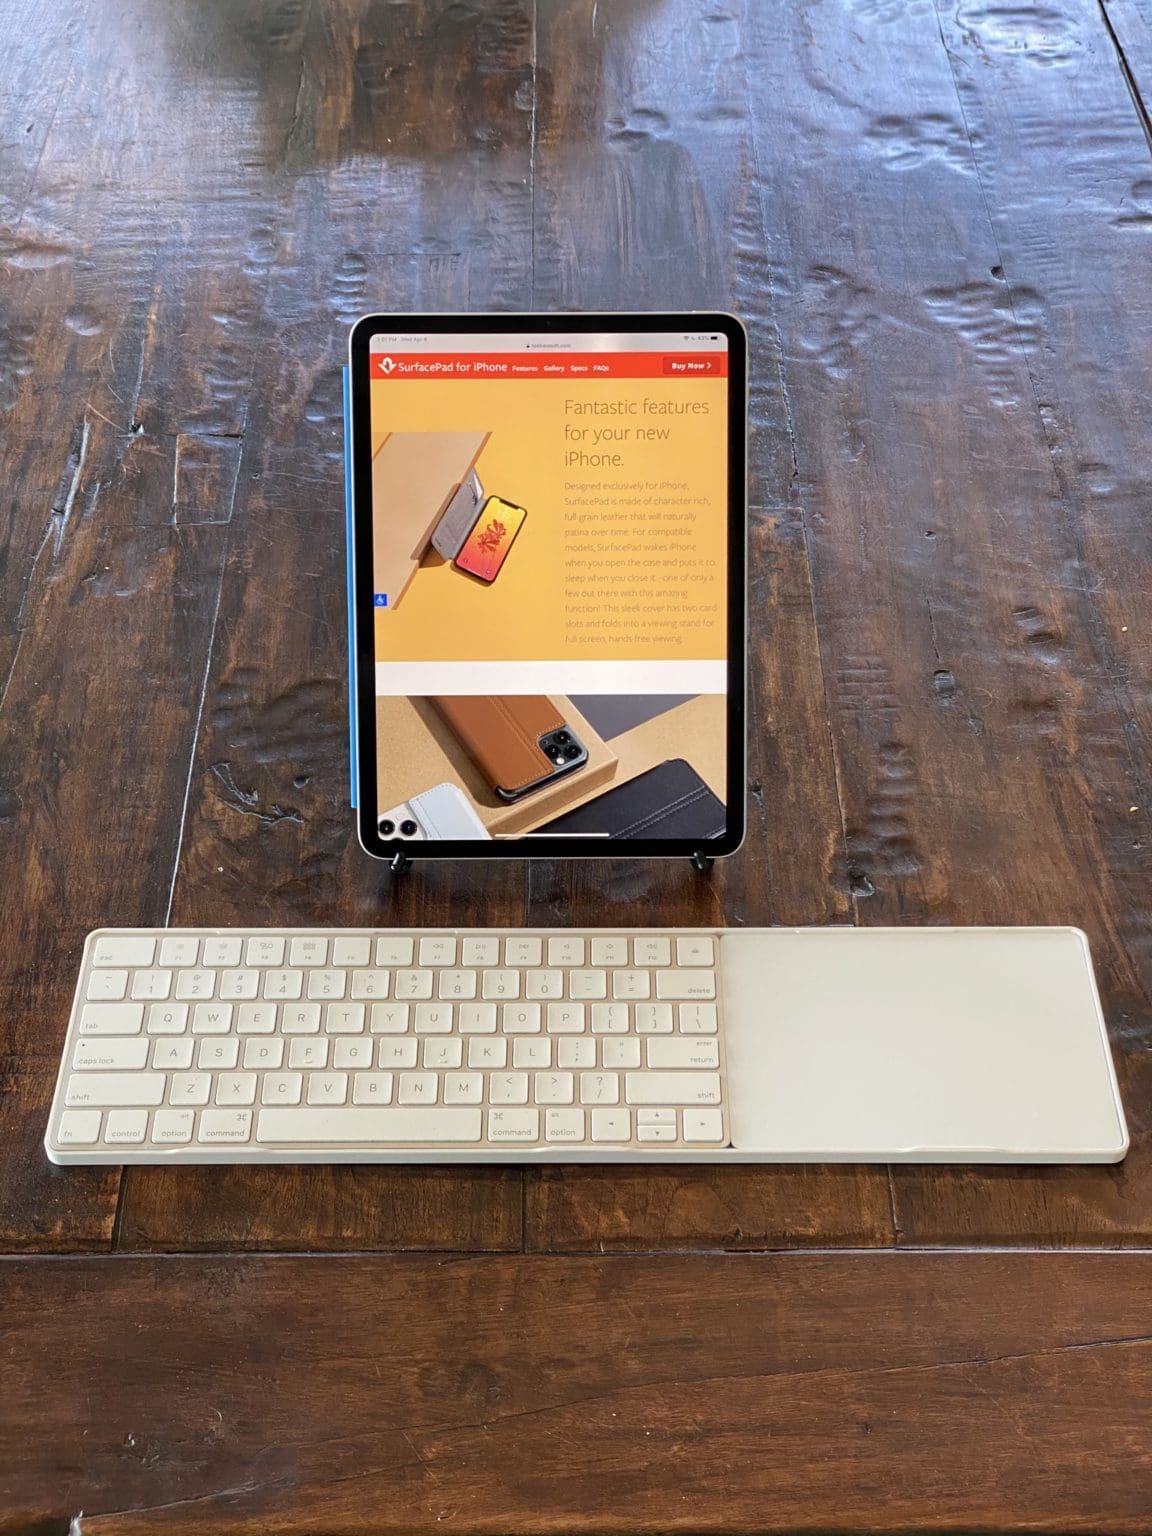 This portrait mode iPad setup is ready for serious keyboard and trackpad action.